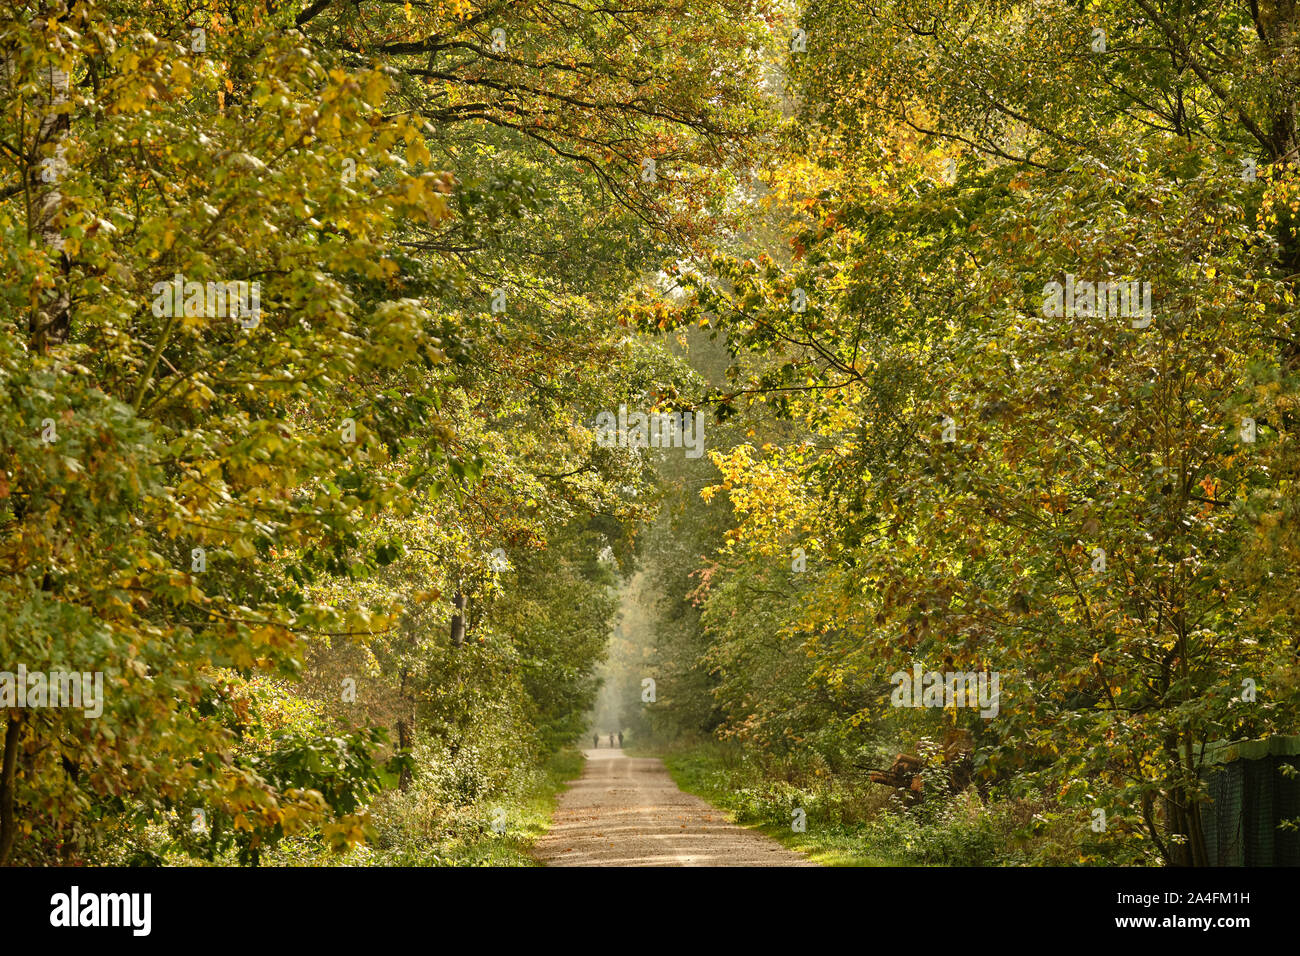 Beautiful landscape at the beginning of autumn with a long gravel road leading through an idyllic forest with the leaves turning yellow. Seen in Septe Stock Photo